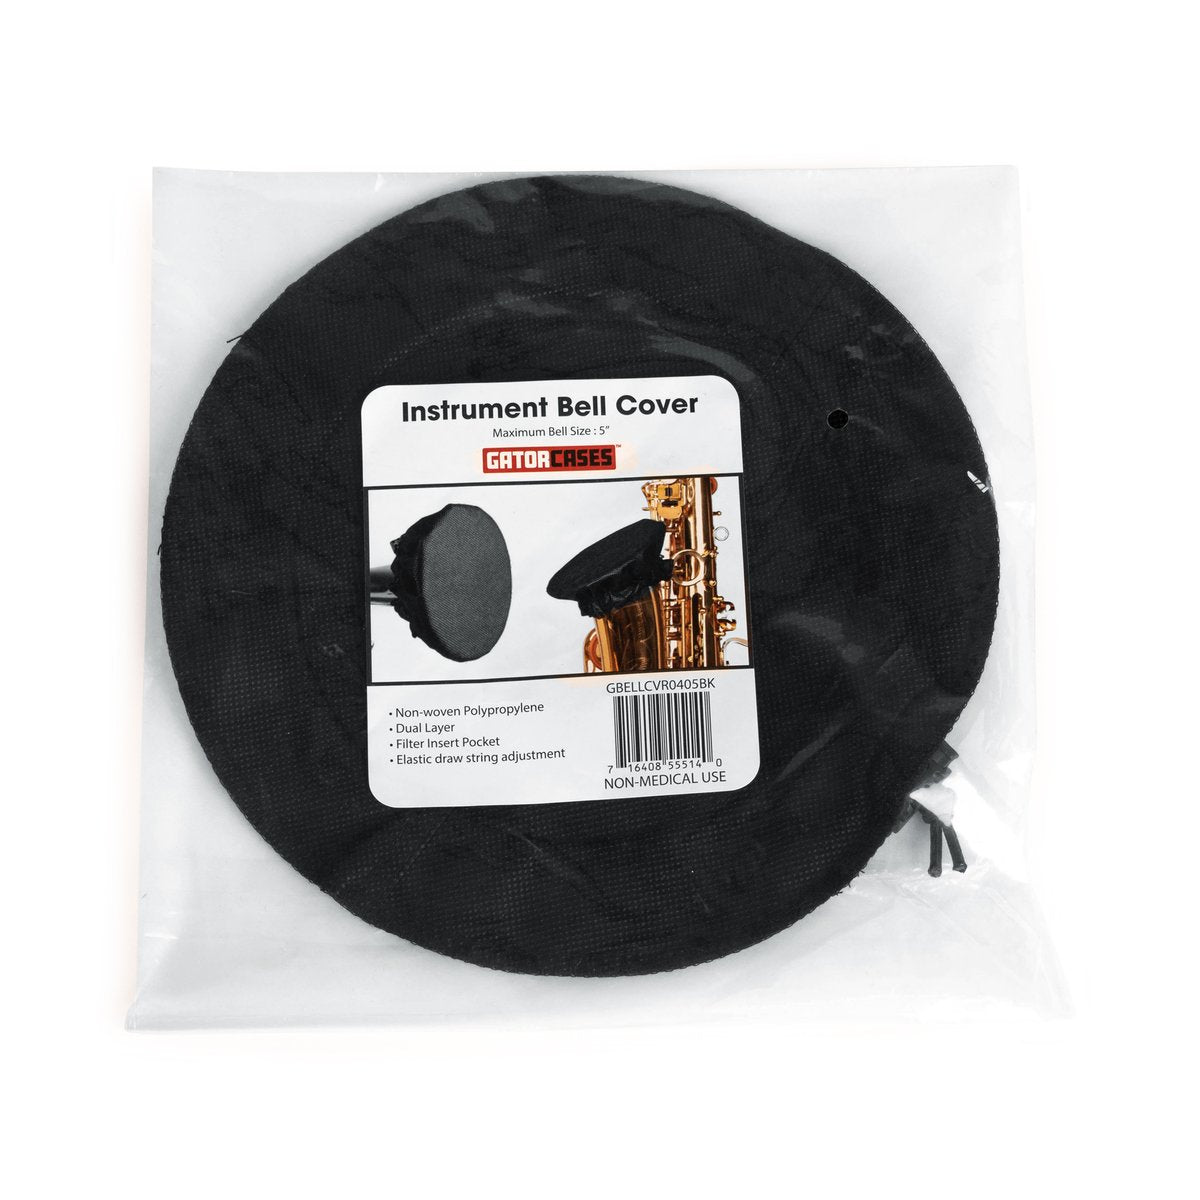 Wind Instrument Double-Layer Cover for Bell Sizes Ranging from 10 to 11-Inches – Black Color